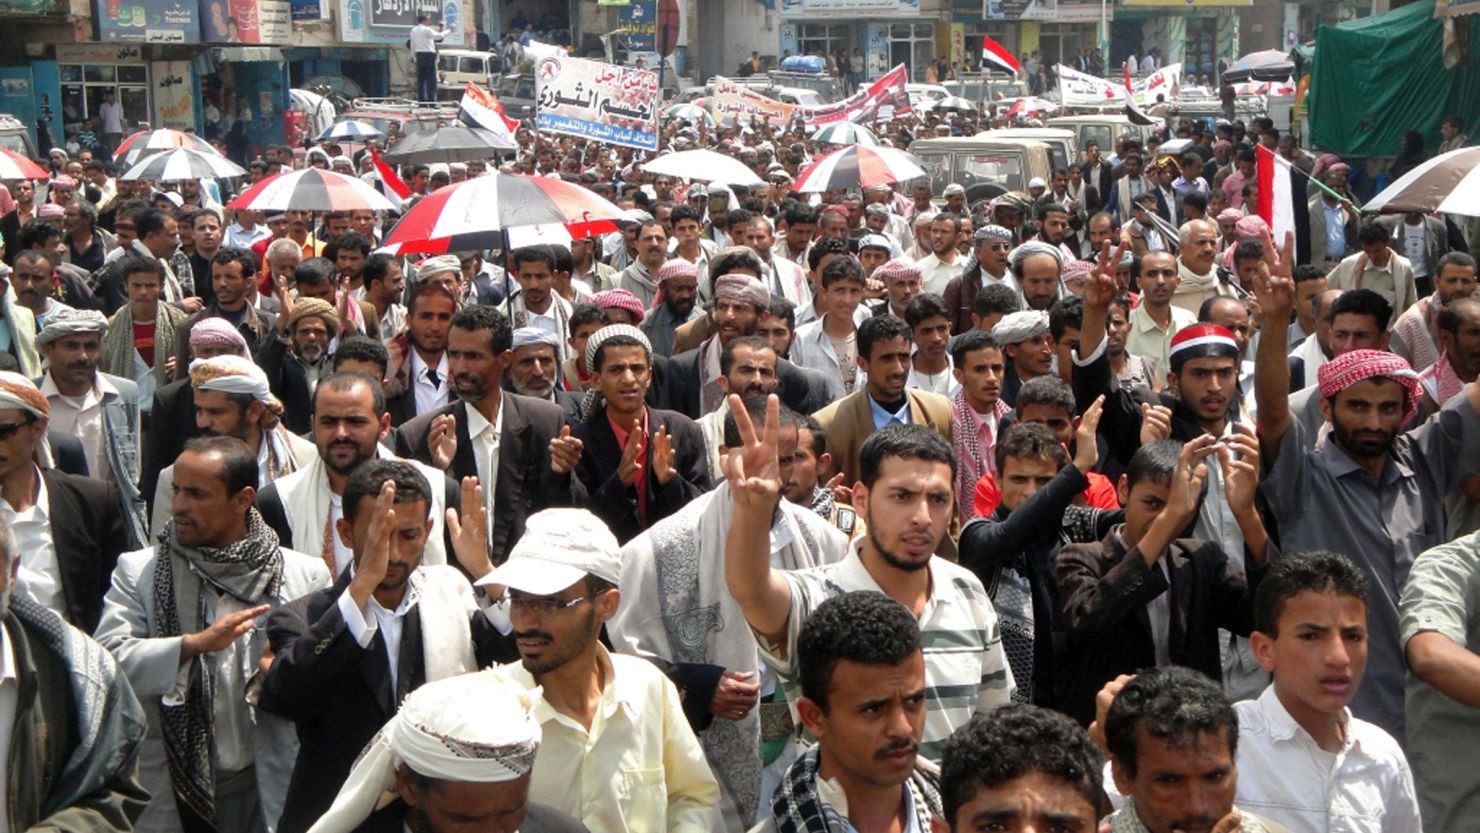 Protests in Ibb on September 19 against the deadly clashes between anti-government protesters and security forces in Sanaa.